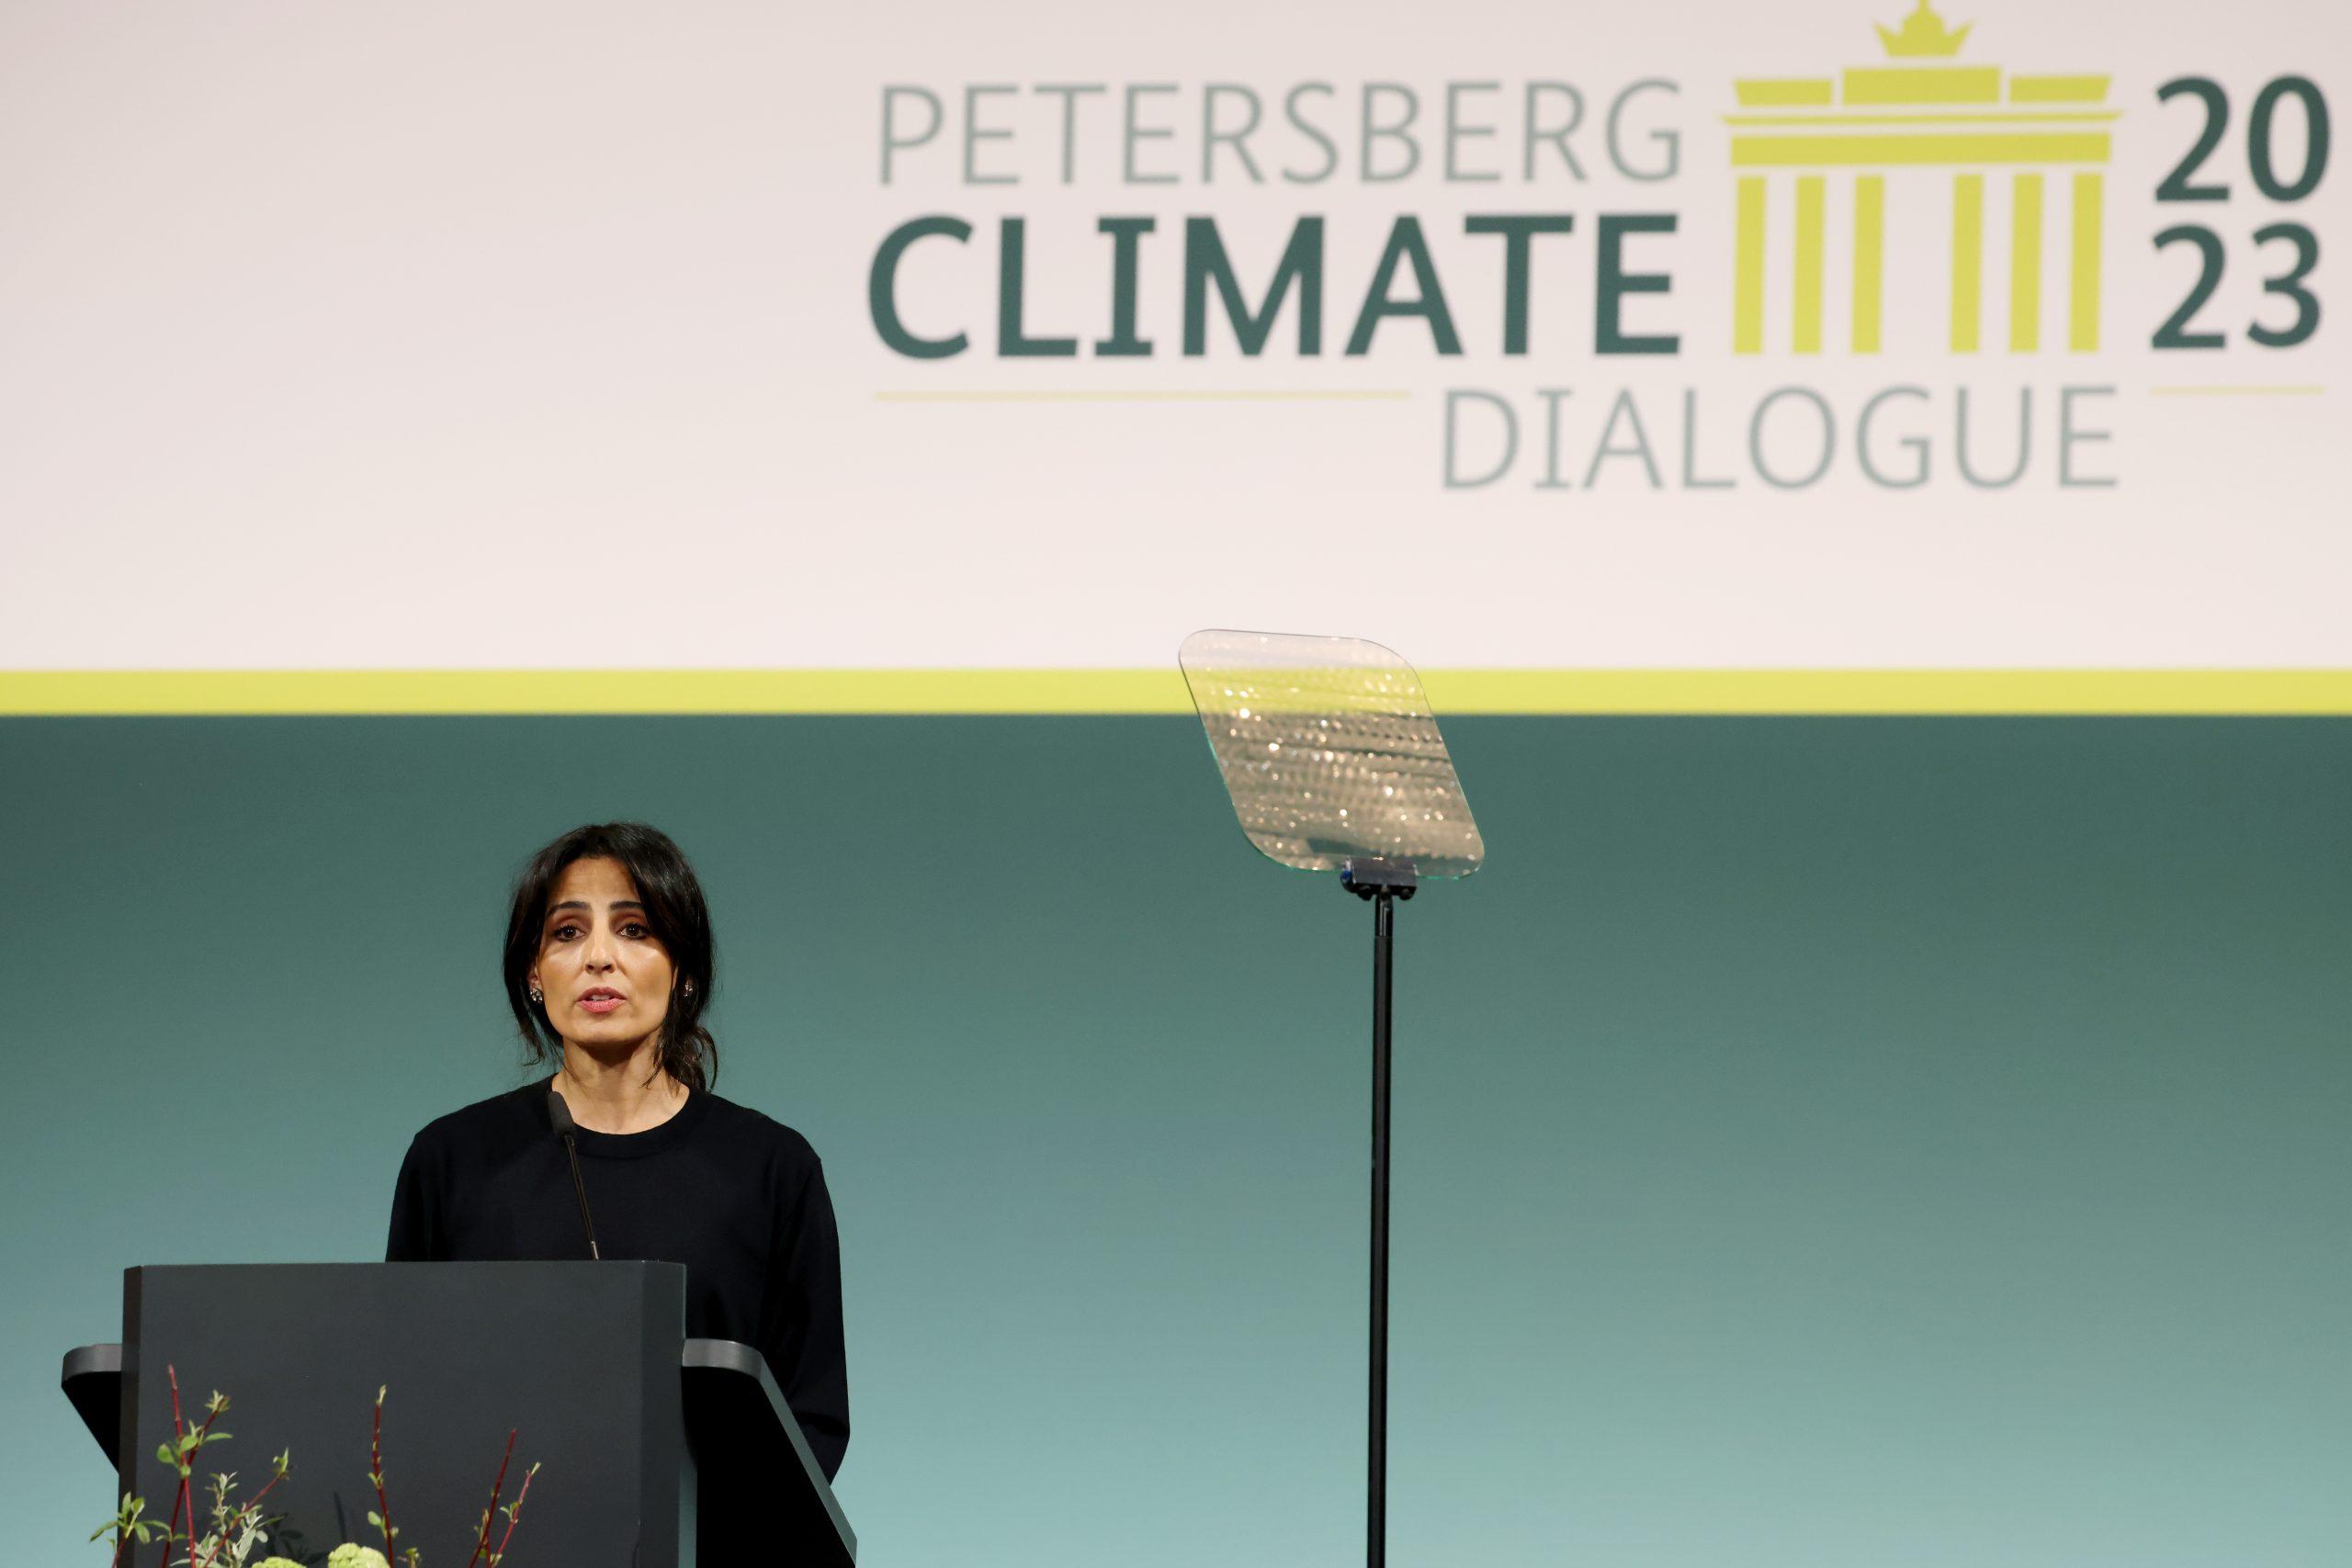 Petersberg Climate Dialogue 2023: Highlights the Need for Urgent Climate Action_50.1